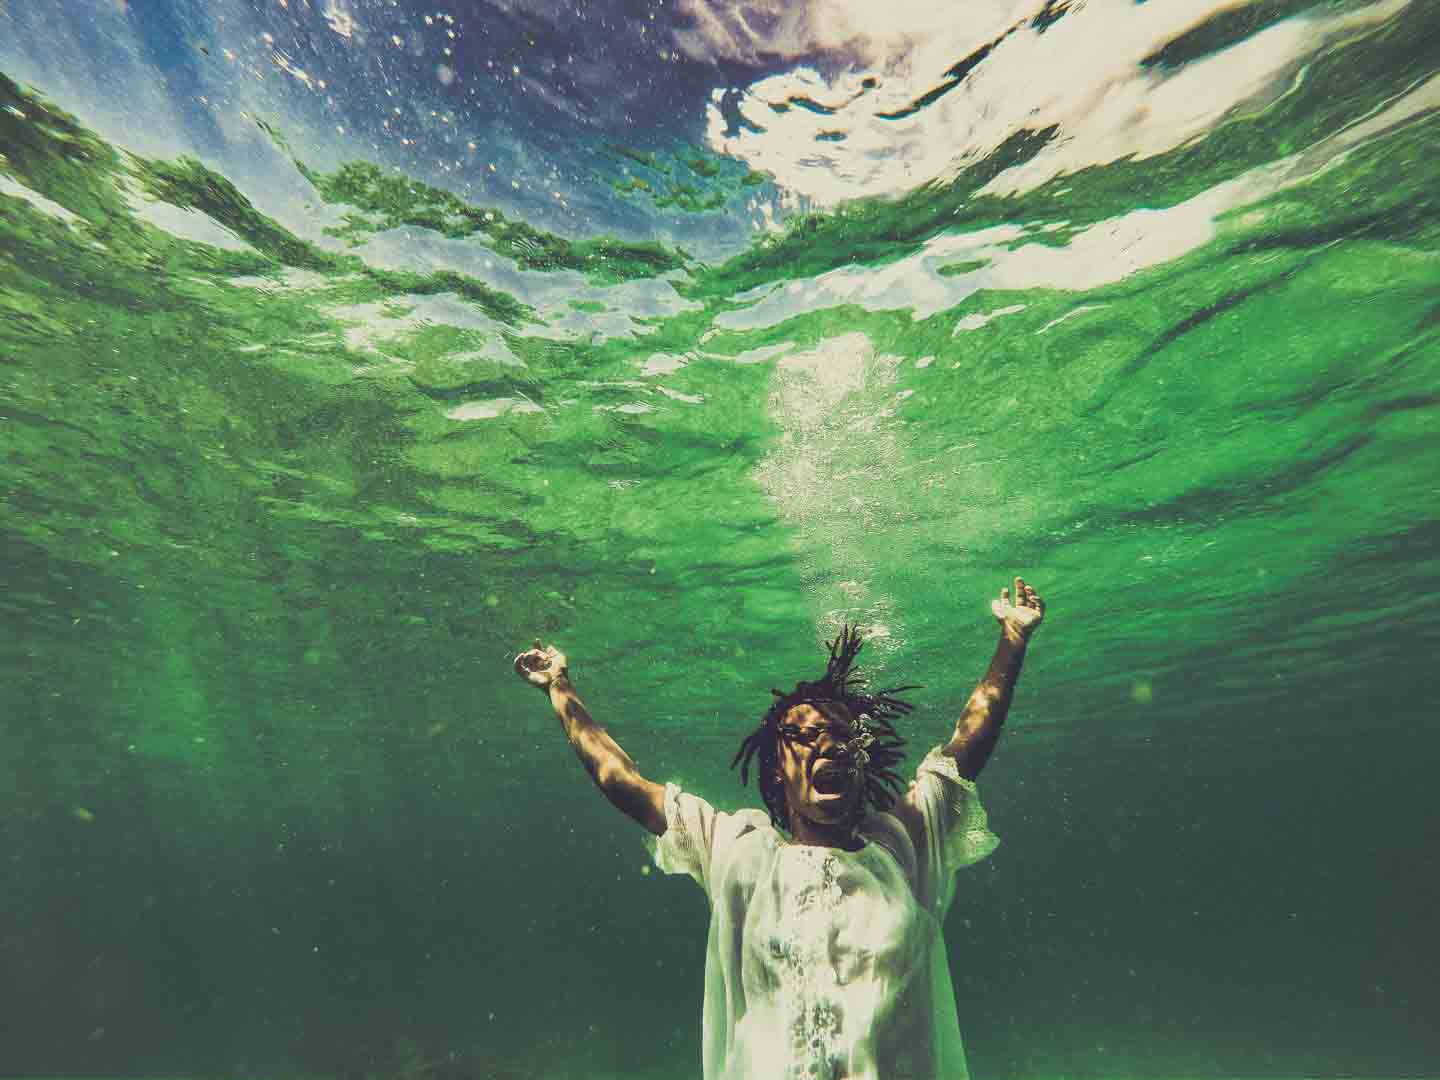 David Berg's 'Deafening Silence' shows a young Black woman underwater, posed as though screaming with her arms raised